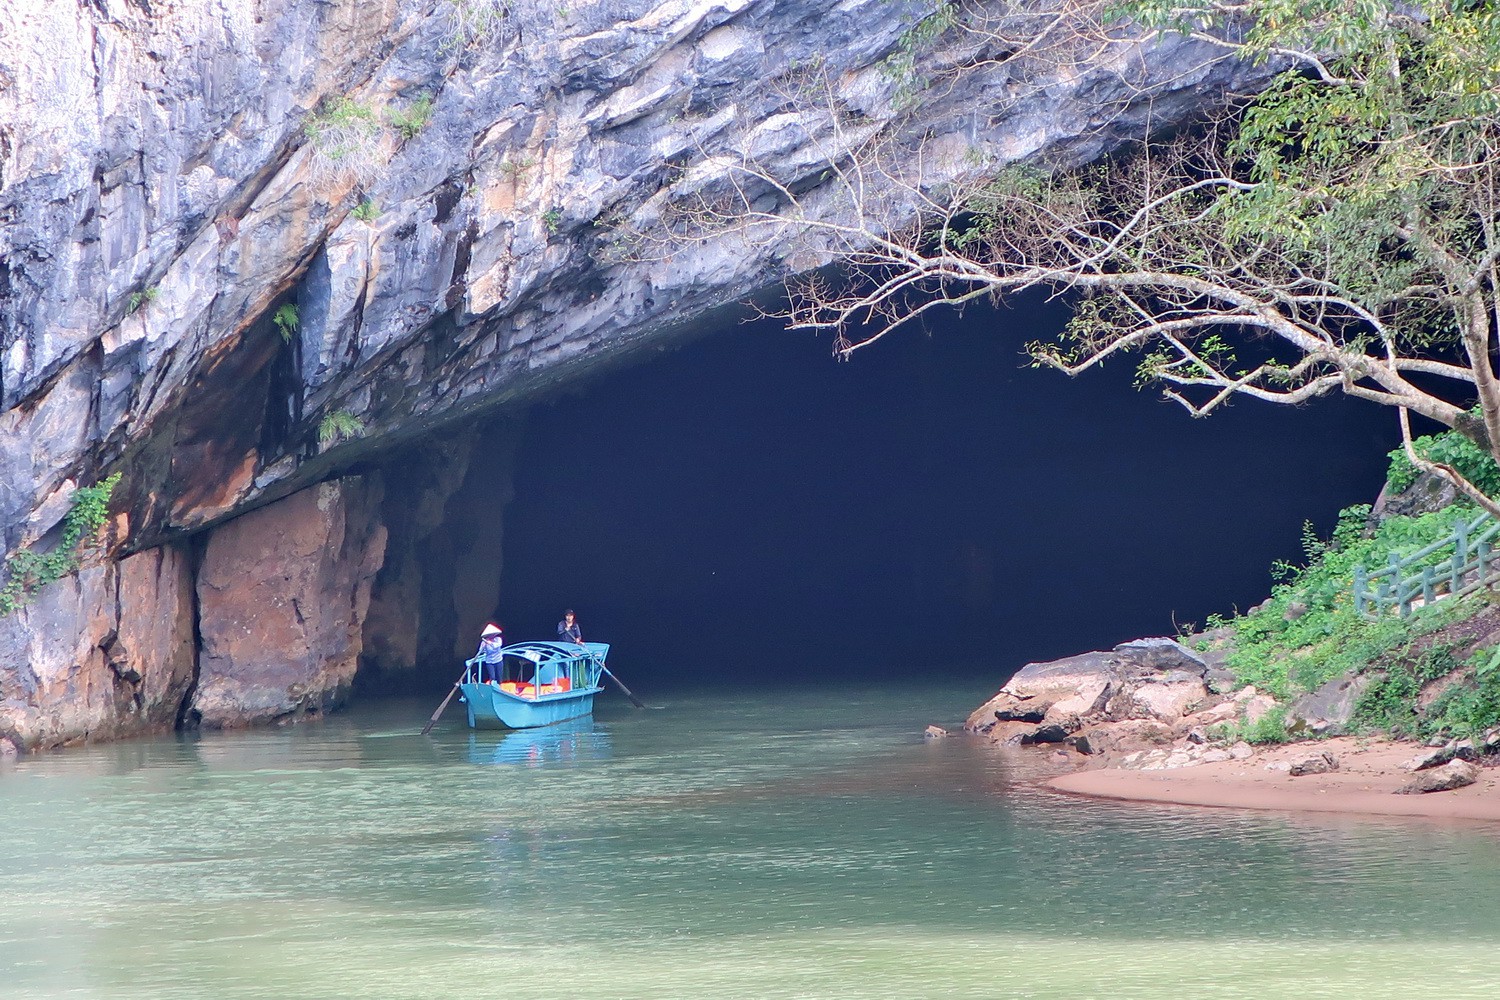 Boat leaving Phong Nha Cave which is the largest known river cave on earth